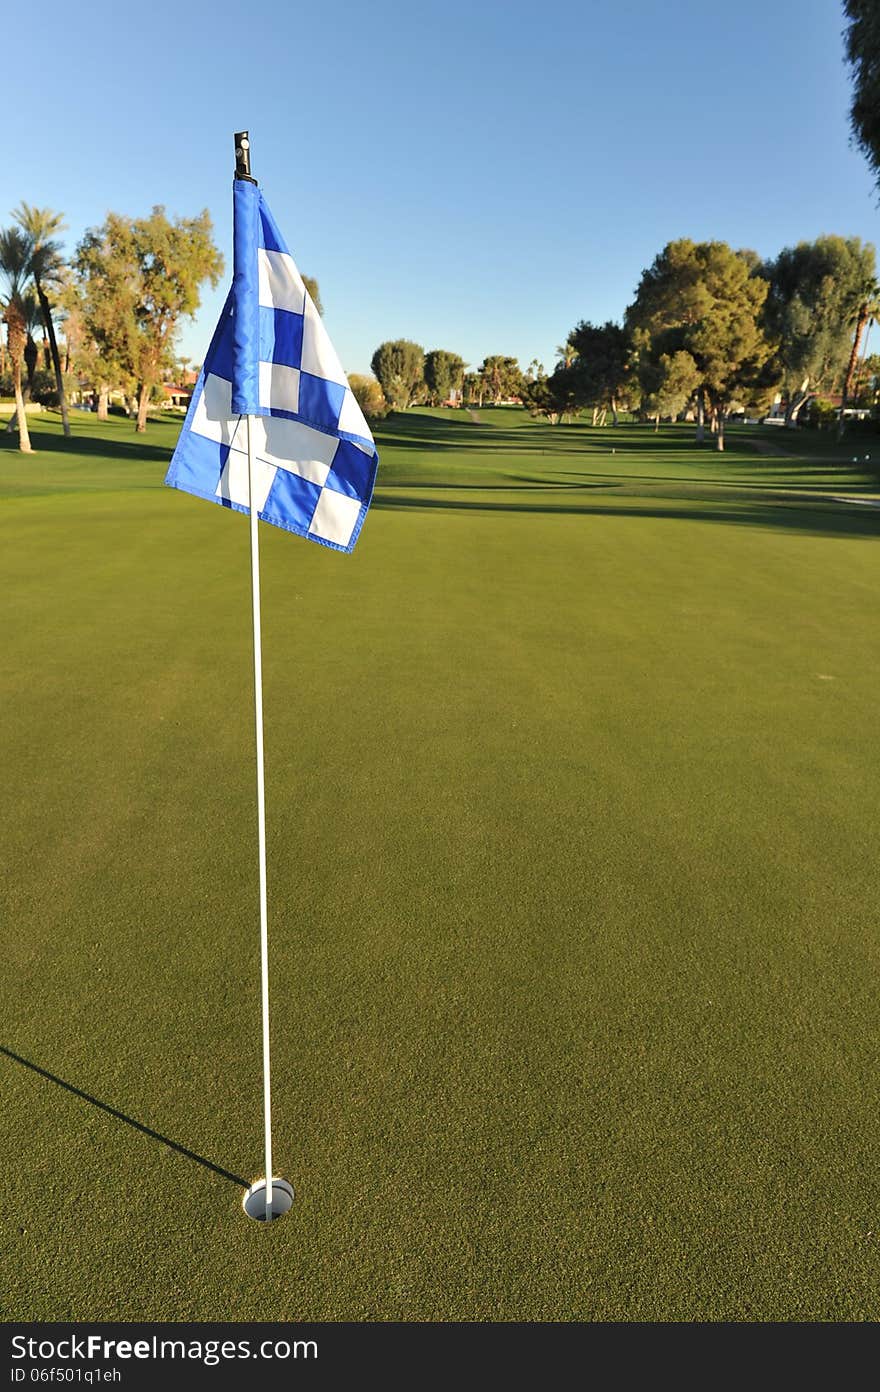 Eye level view of a golf green with a checkered flag. Eye level view of a golf green with a checkered flag